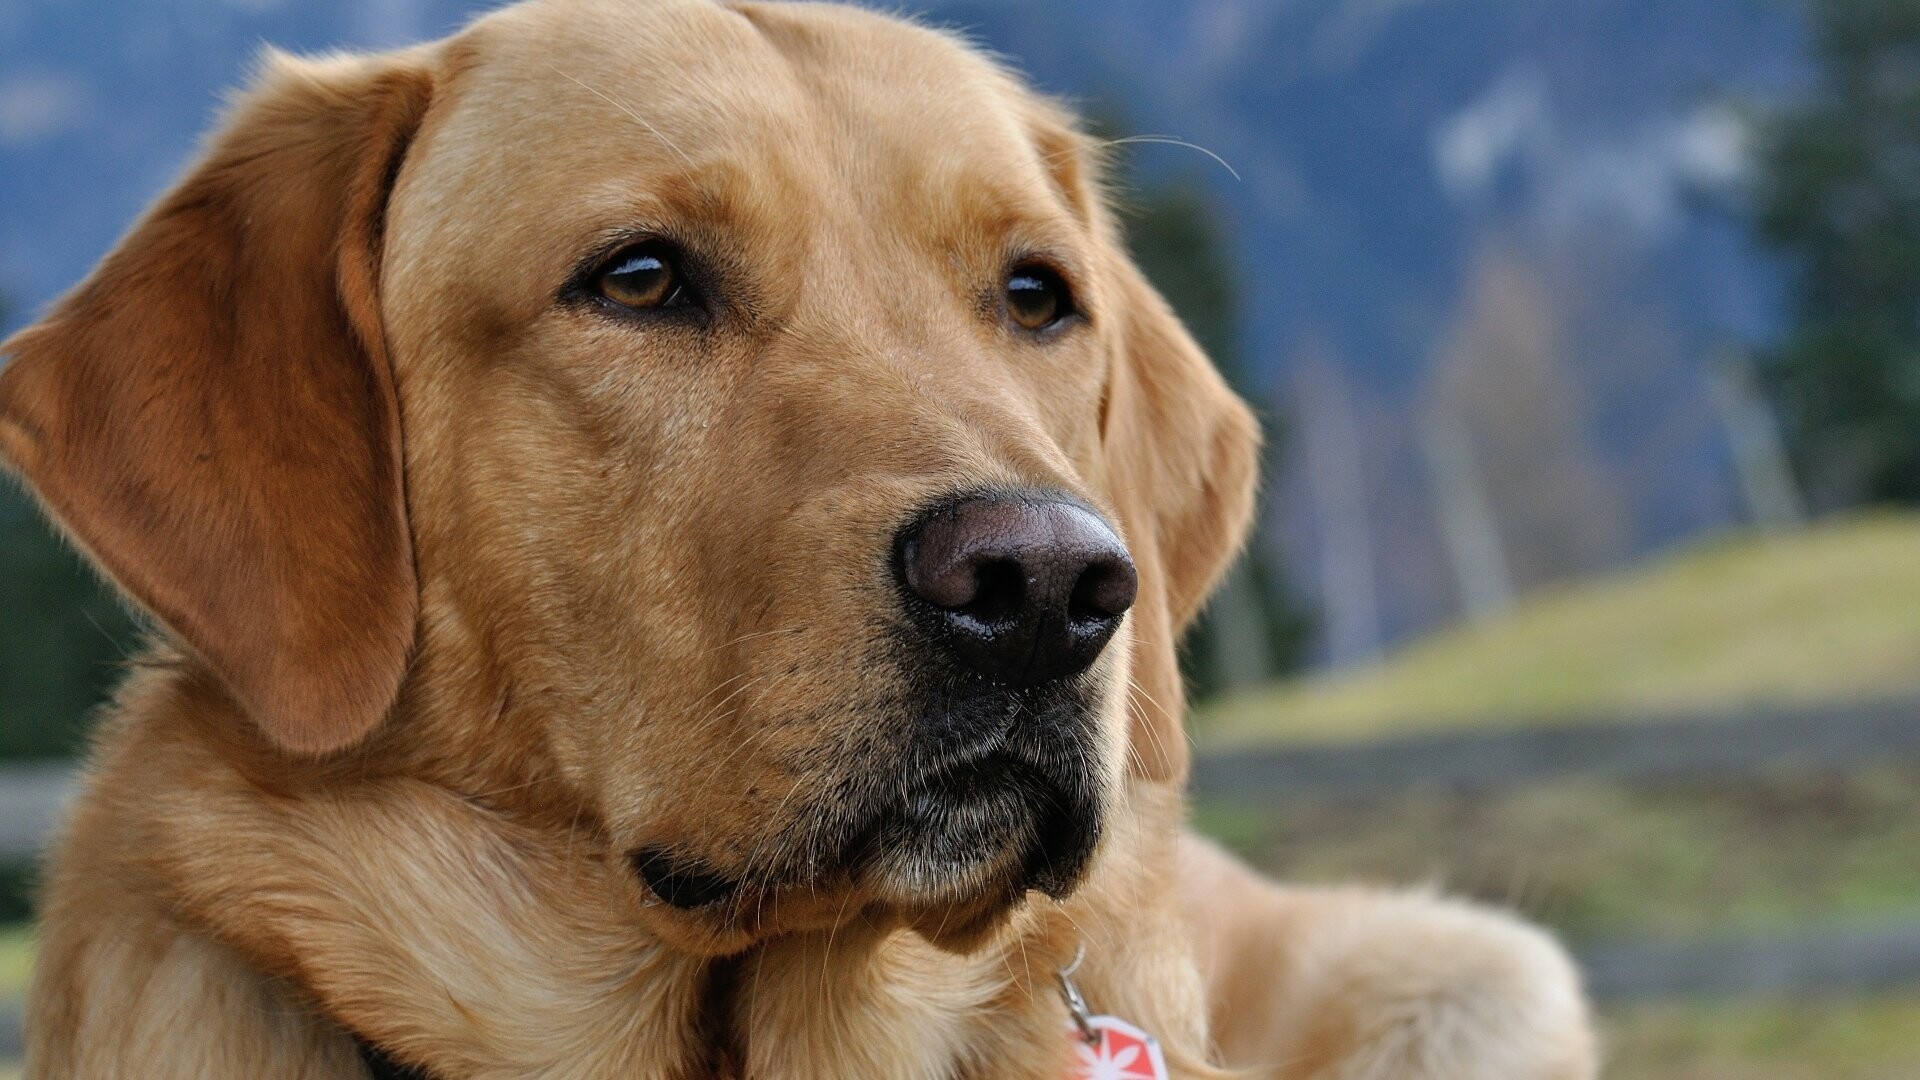 Labrador Retriever: Dogs that were bred to assist fishermen when they were catching fish. 1920x1080 Full HD Wallpaper.